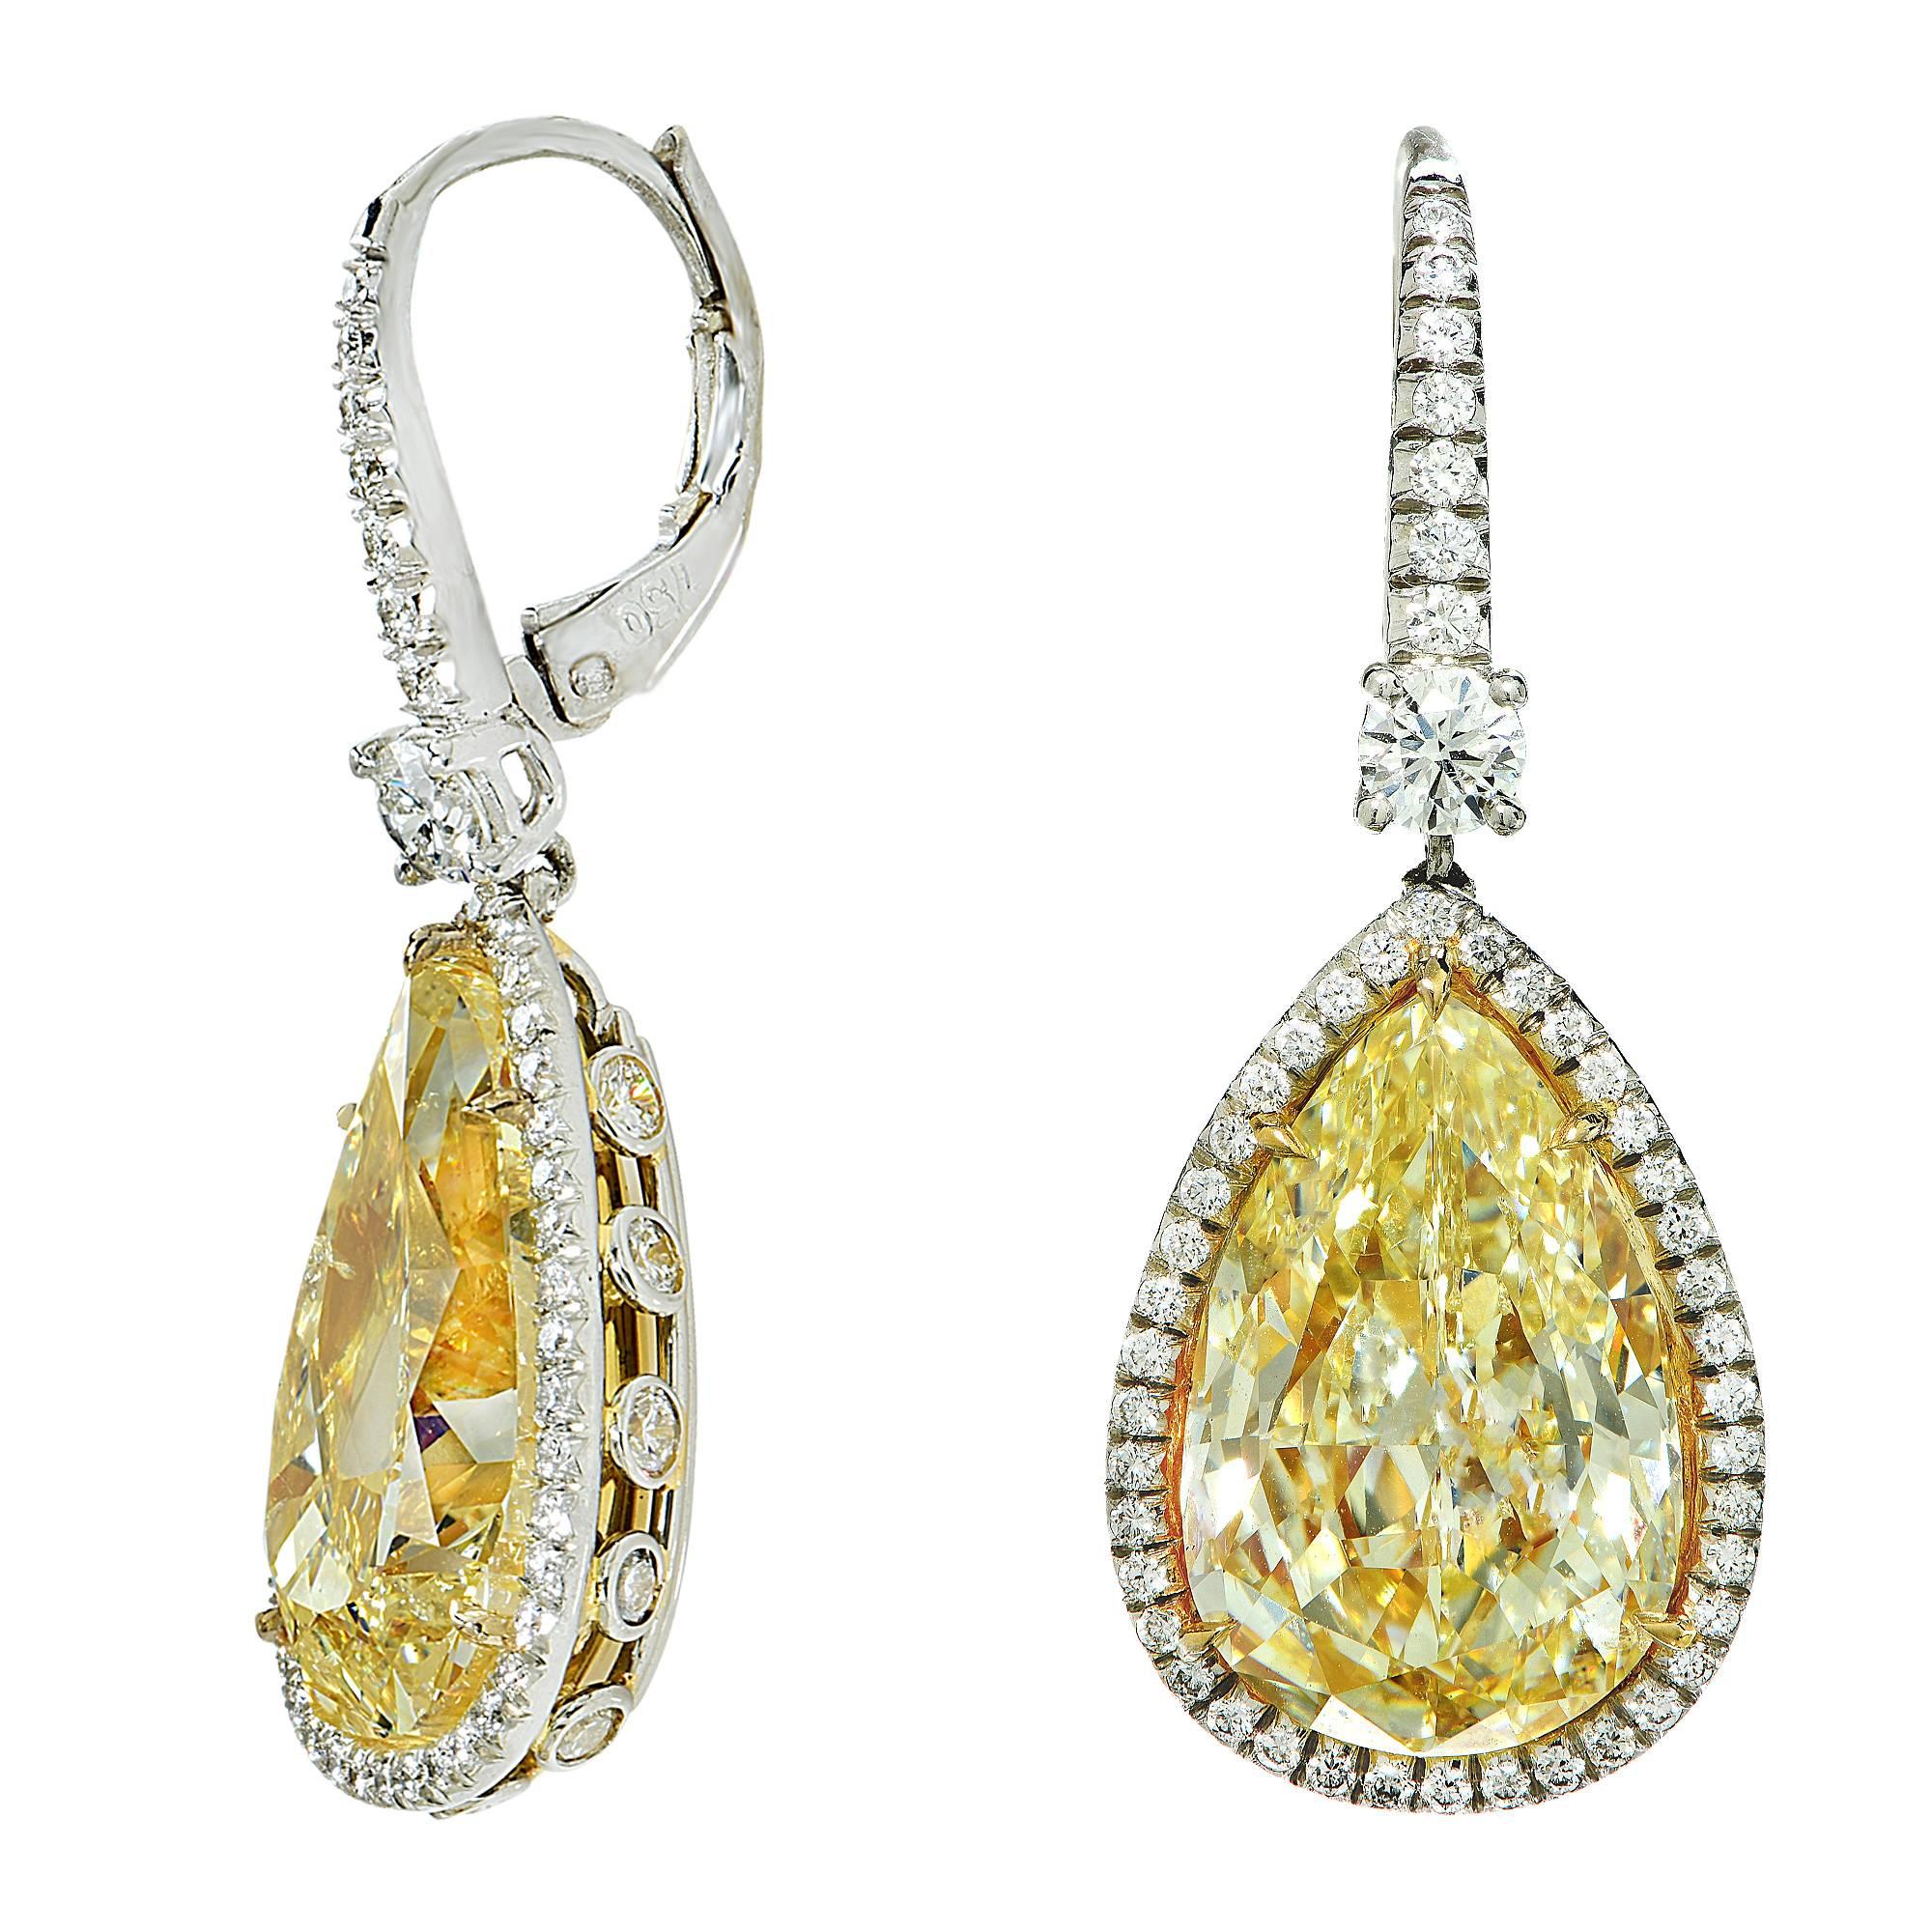 These elegant platinum earrings feature 2 fancy light yellow pear shape diamonds weighing 14.49cts total and are accented by 76 round brilliant cut diamonds weighing .90ct, G color, VS clarity.

These yellow diamond earrings are accompanied by a